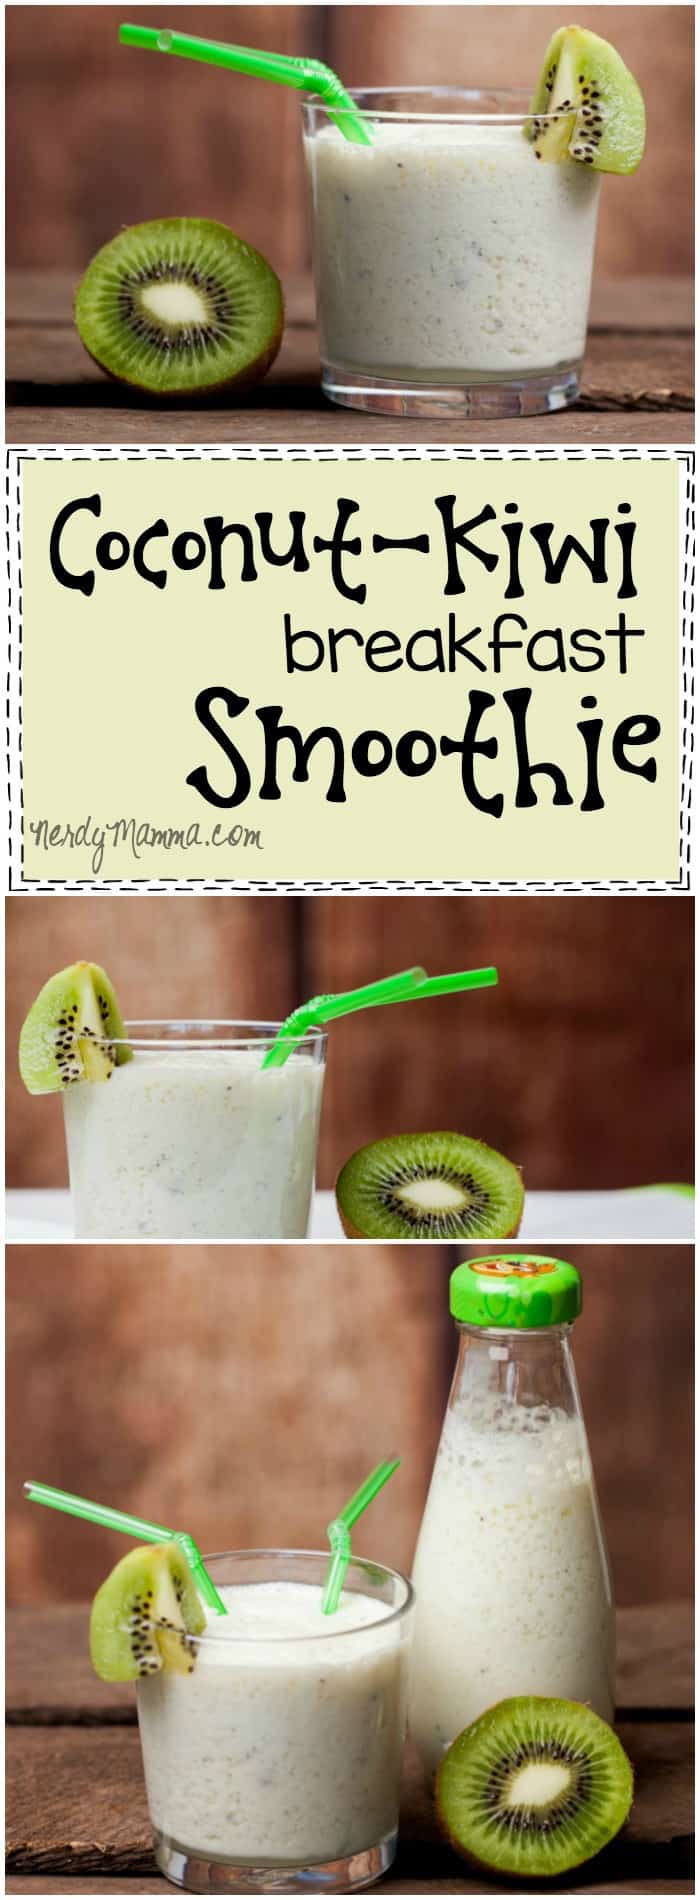 I love this recipe for Coconut-Kiwi Breakfast Smoothie! Easy and fast--it sounds delicious!